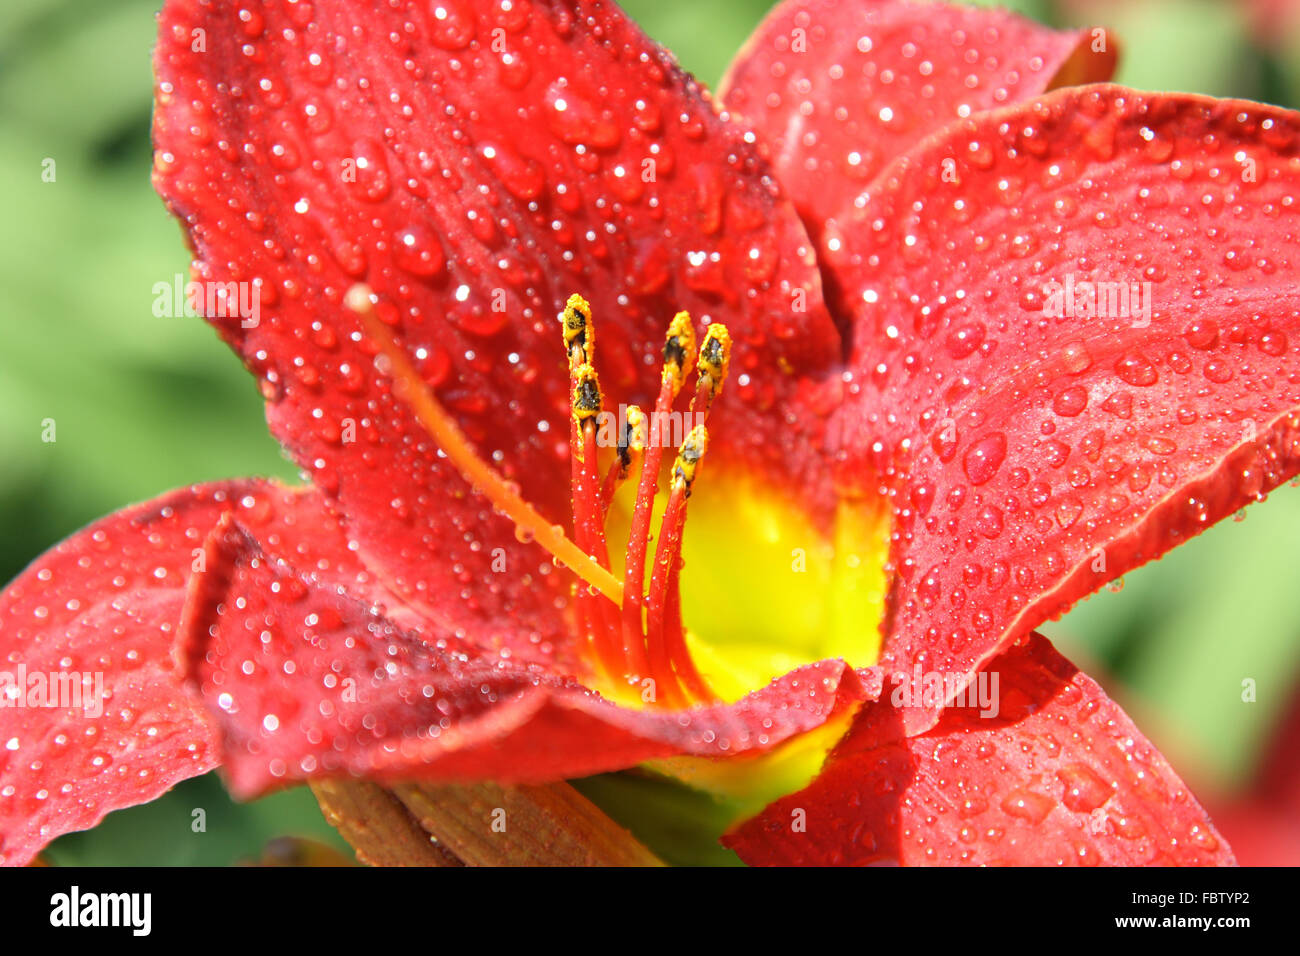 Bloom of red lily and pistils. Stock Photo